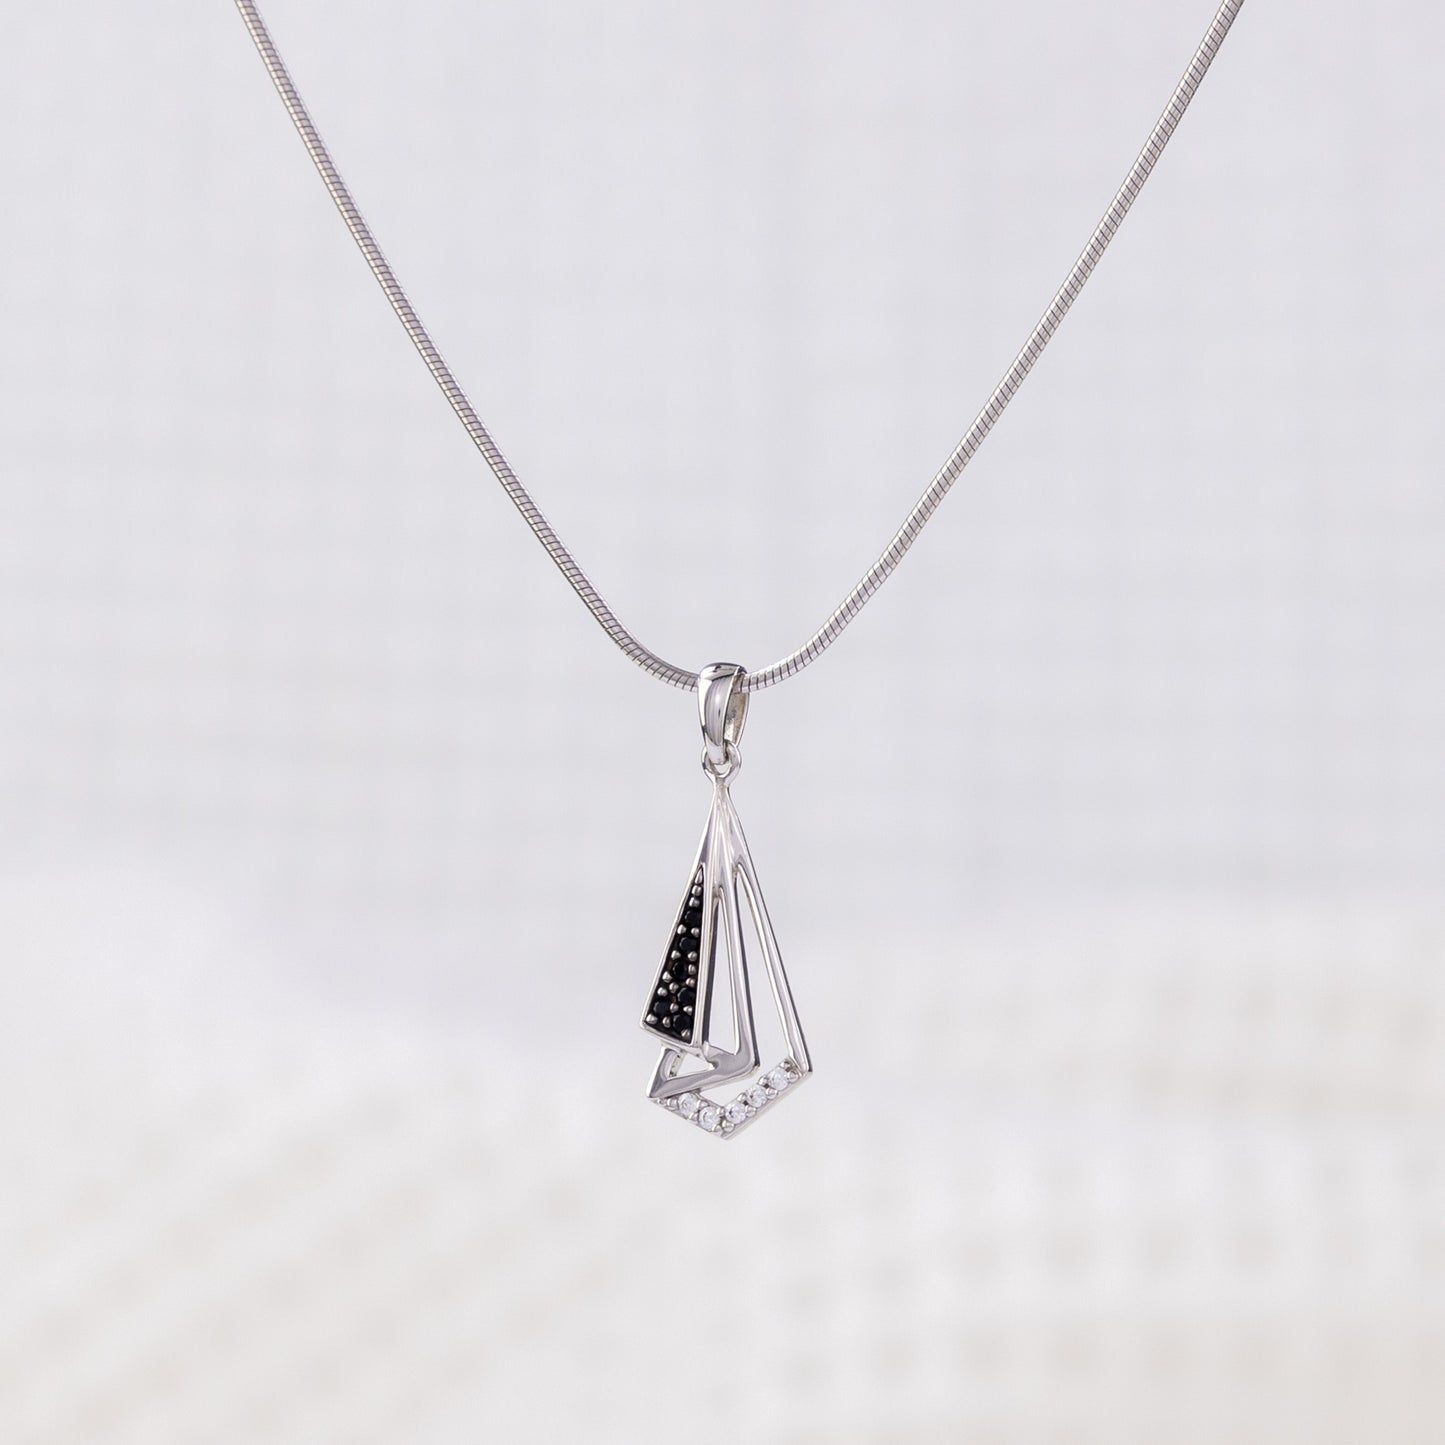 Classy Pendant Necklace with White Cubic Zirconia and Black Crystals, Black and Silver Rhodium Plating